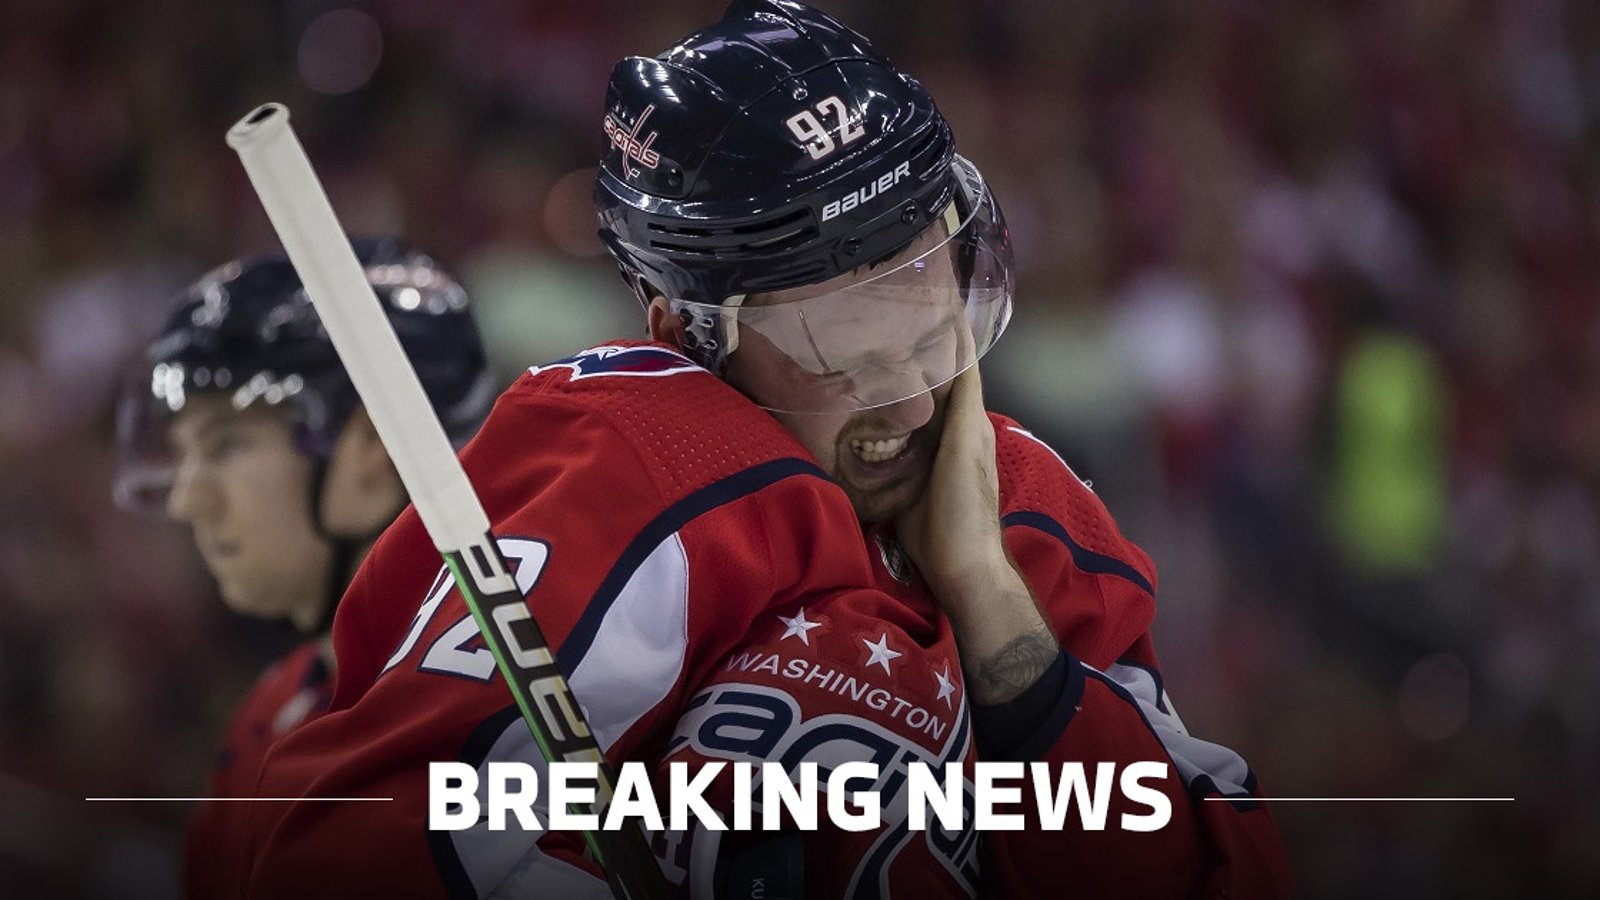 Evgeny Kuznetsov will be suspended by the NHL!